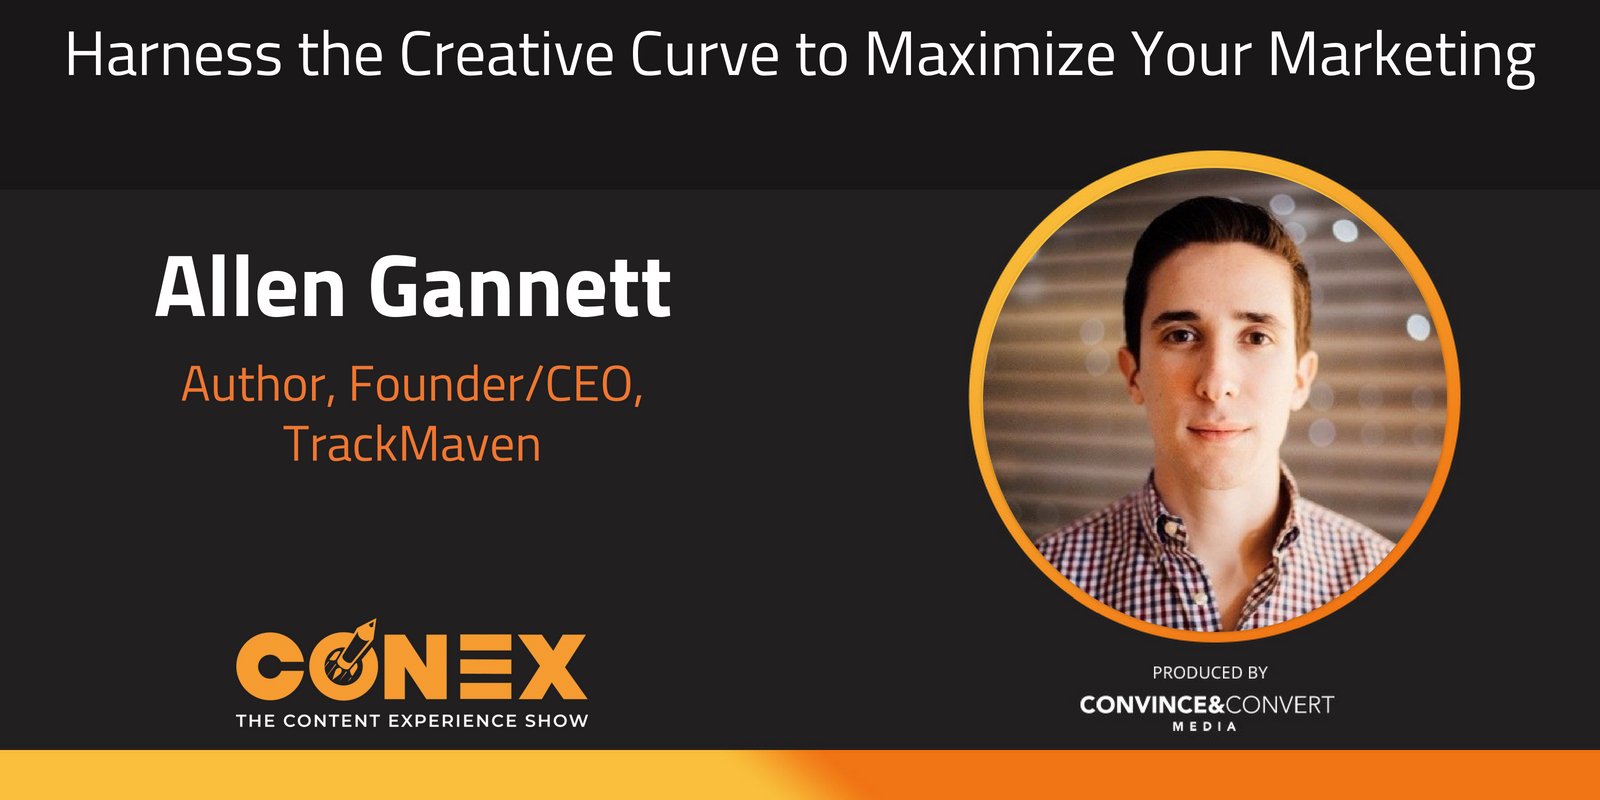 Harness the Creative Curve to Maximize Your Marketing